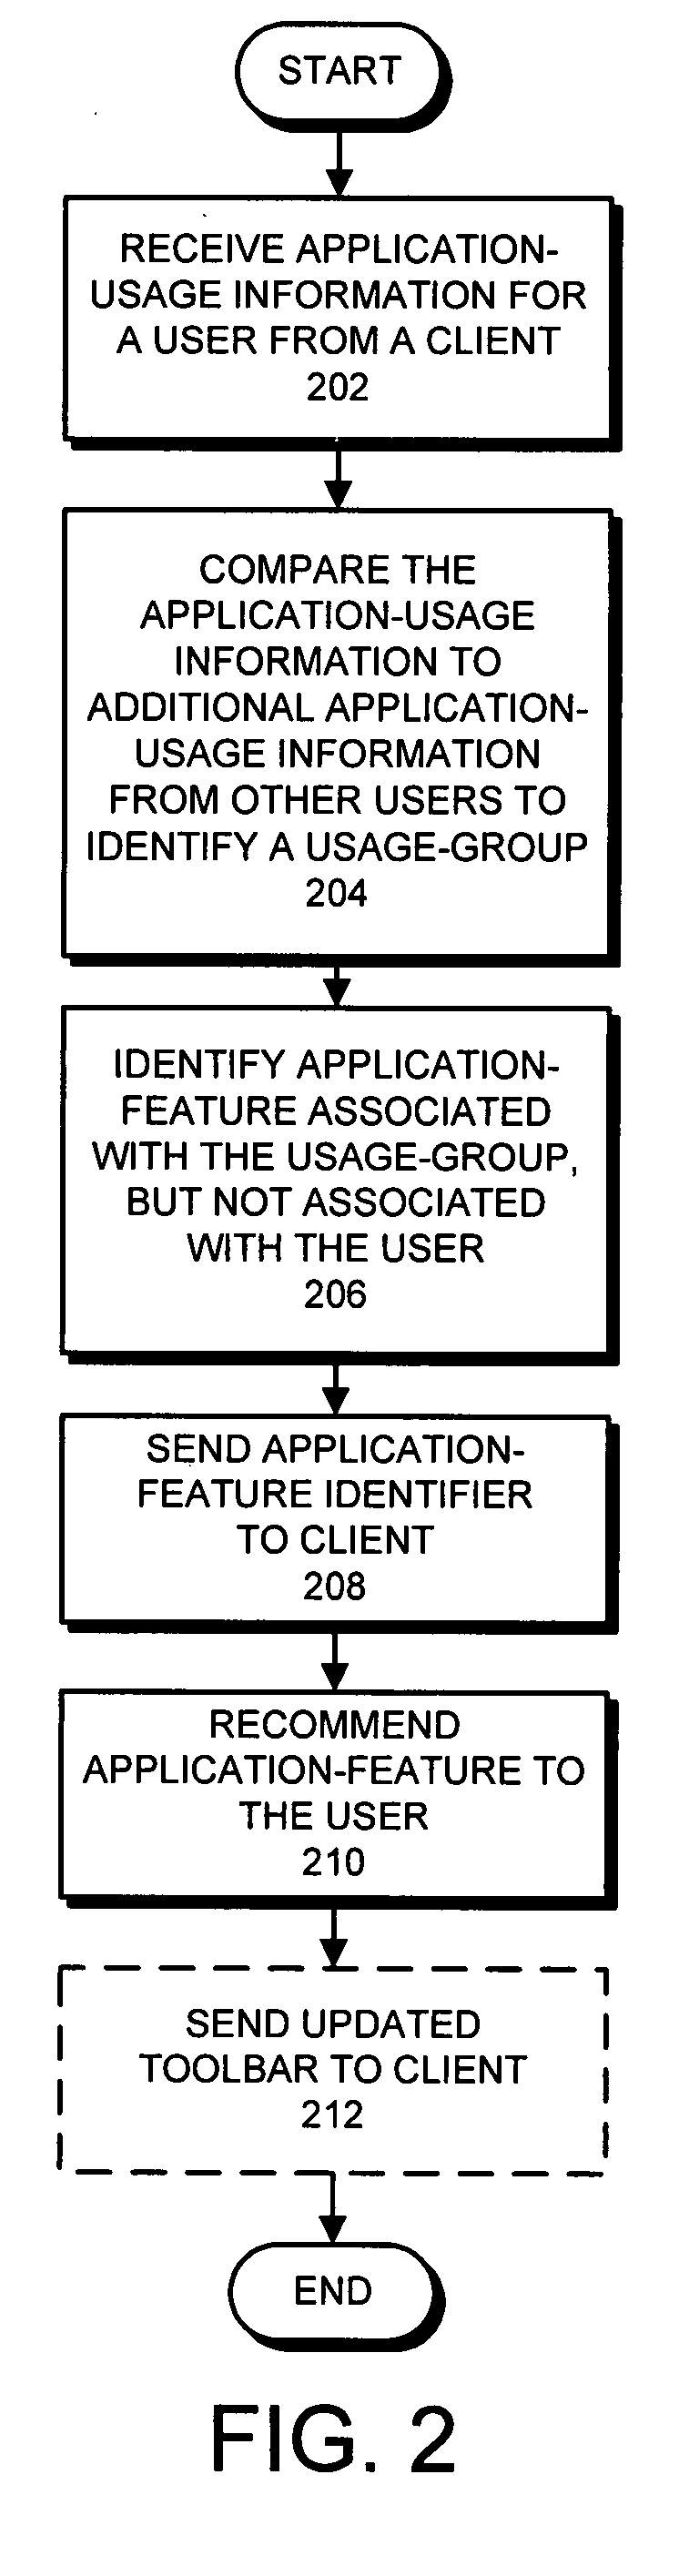 Method and apparatus for recommending an application-feature to a user